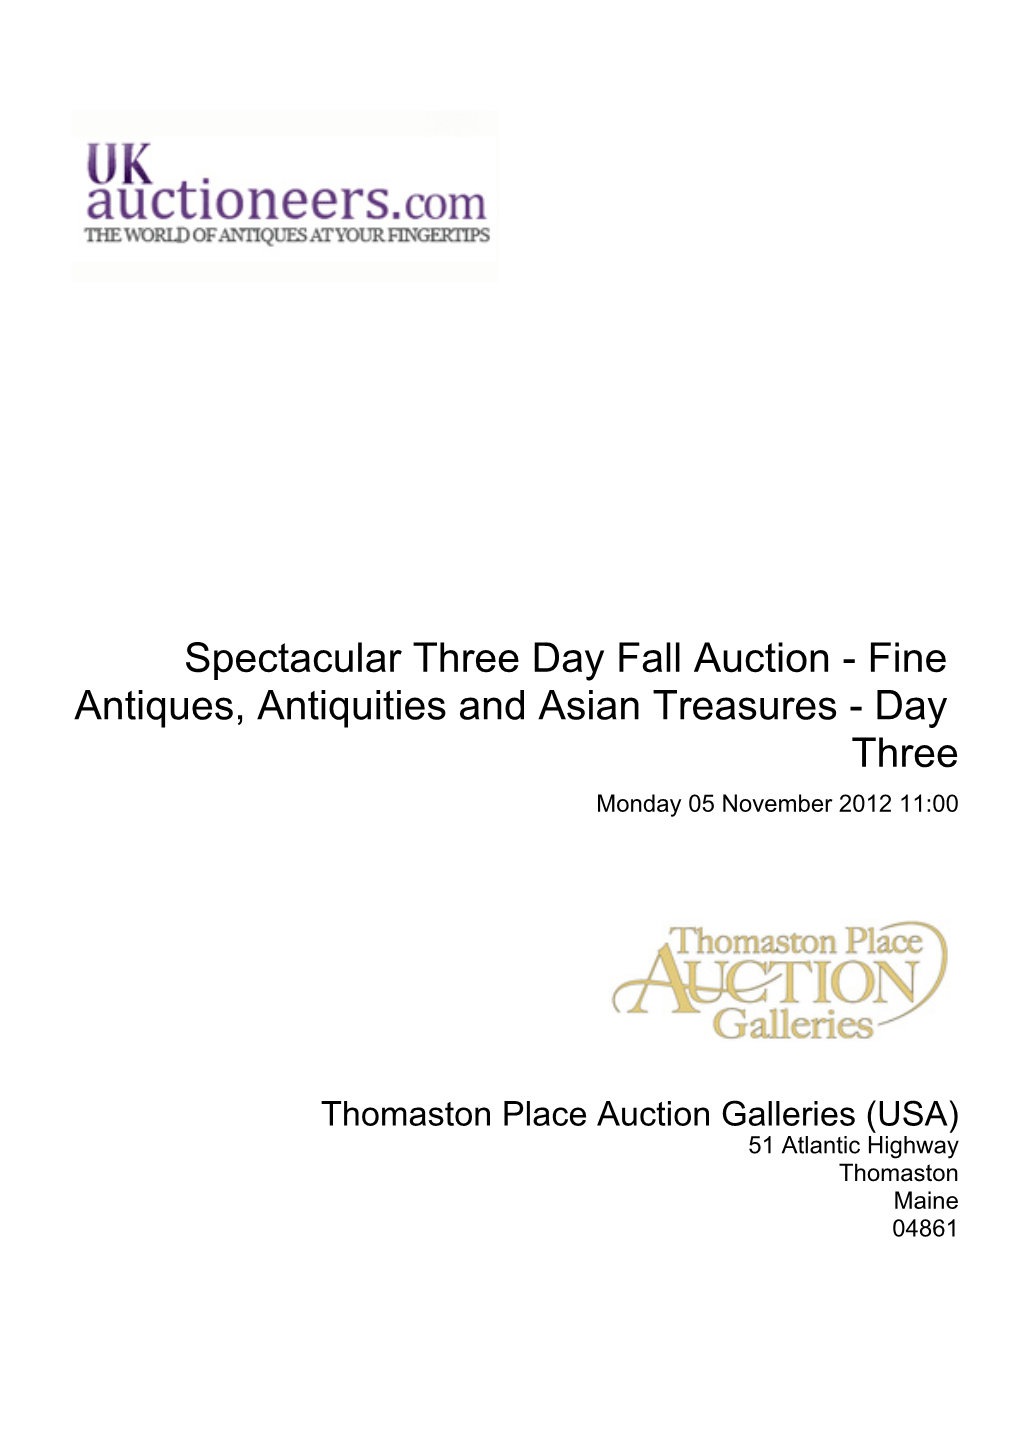 Spectacular Three Day Fall Auction - Fine Antiques, Antiquities and Asian Treasures - Day Three Monday 05 November 2012 11:00